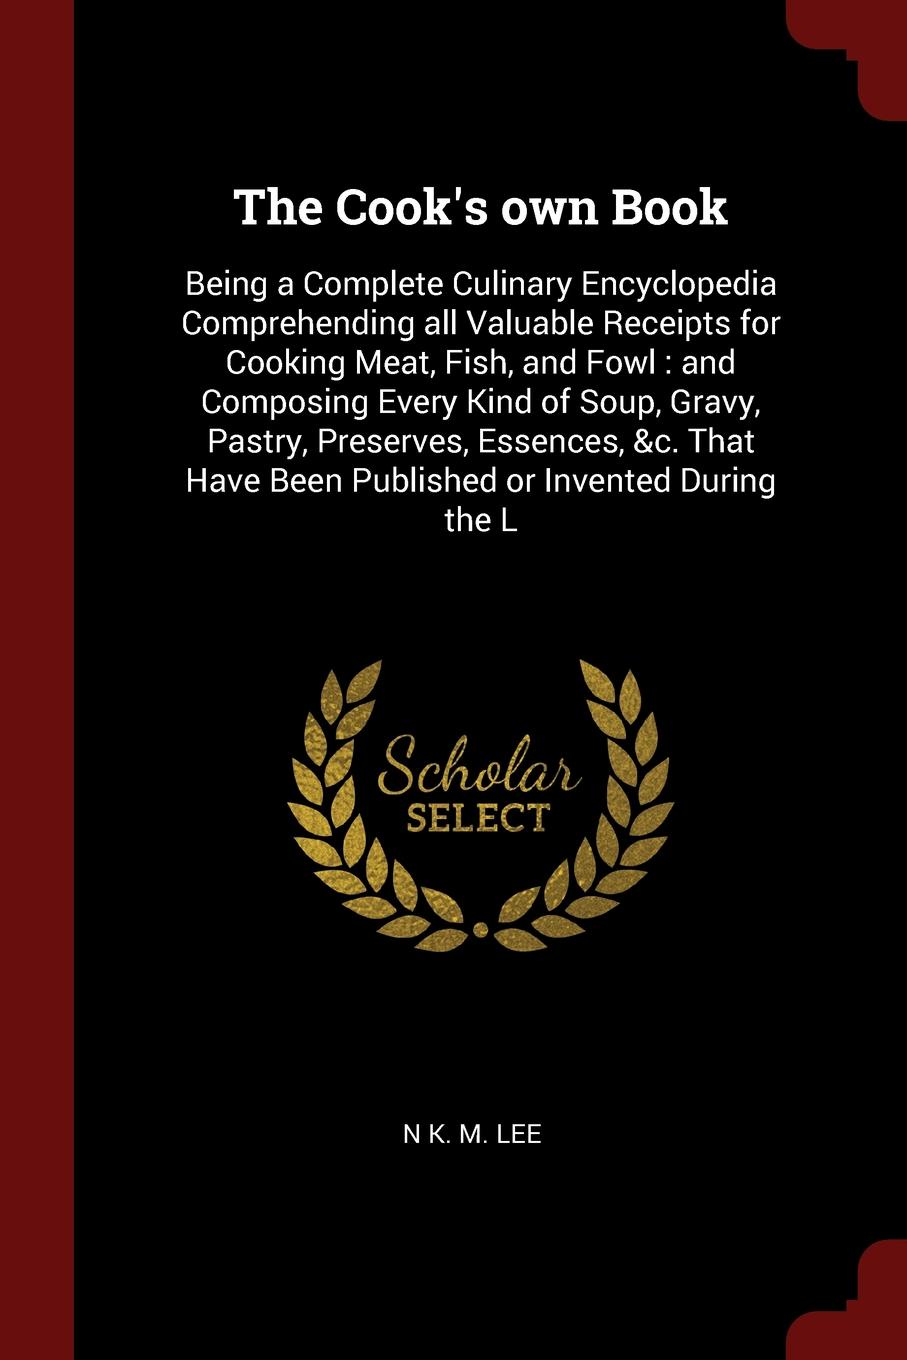 The Cook`s own Book. Being a Complete Culinary Encyclopedia Comprehending all Valuable Receipts for Cooking Meat, Fish, and Fowl : and Composing Every Kind of Soup, Gravy, Pastry, Preserves, Essences, &c. That Have Been Published or Invented Durin...